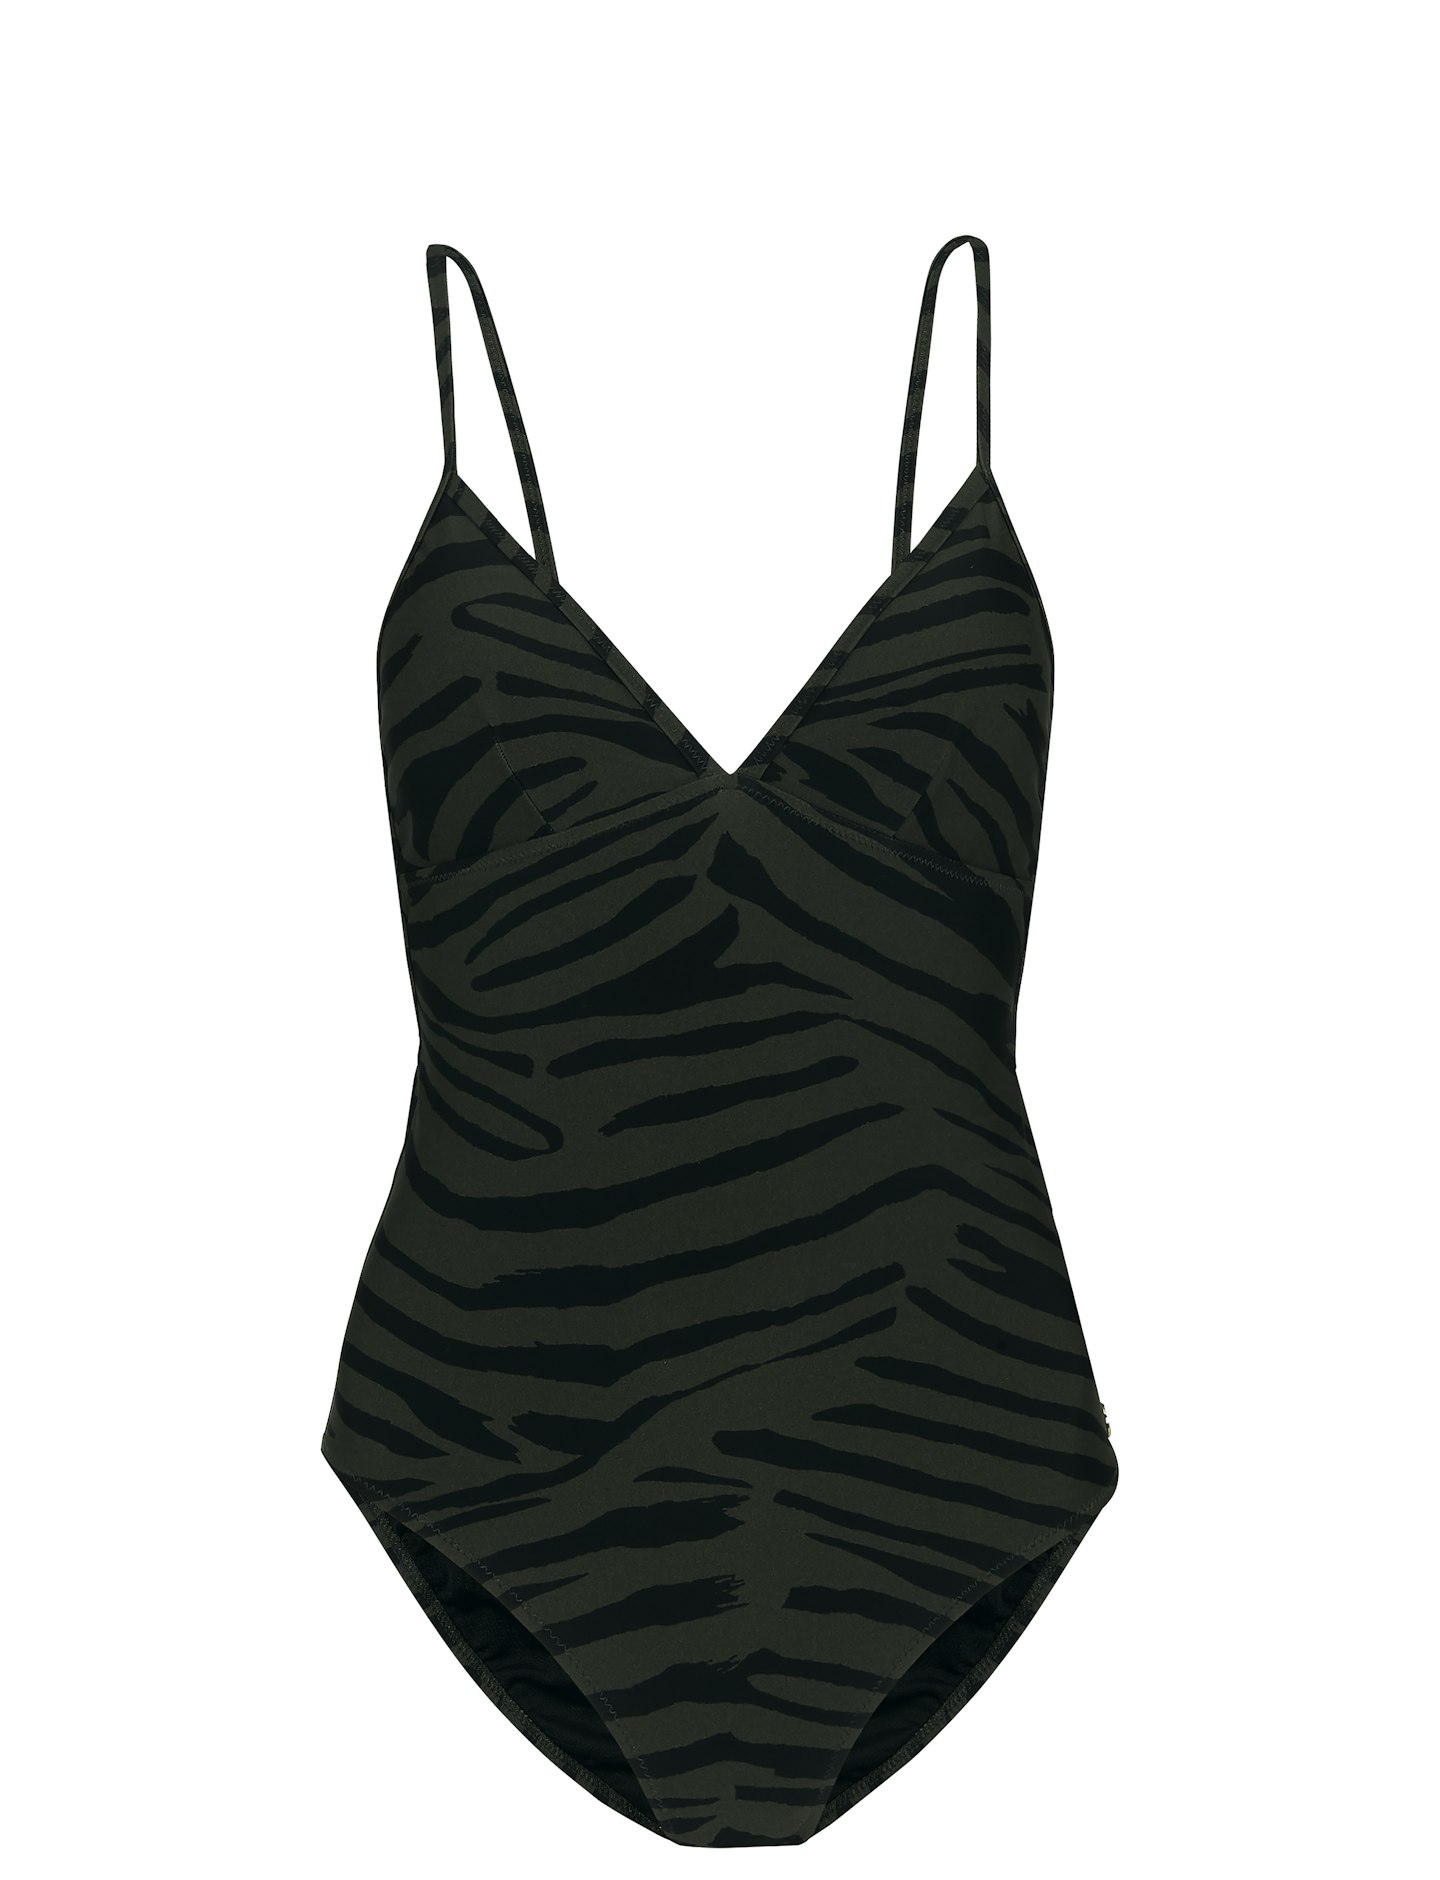 whistles swimsuit